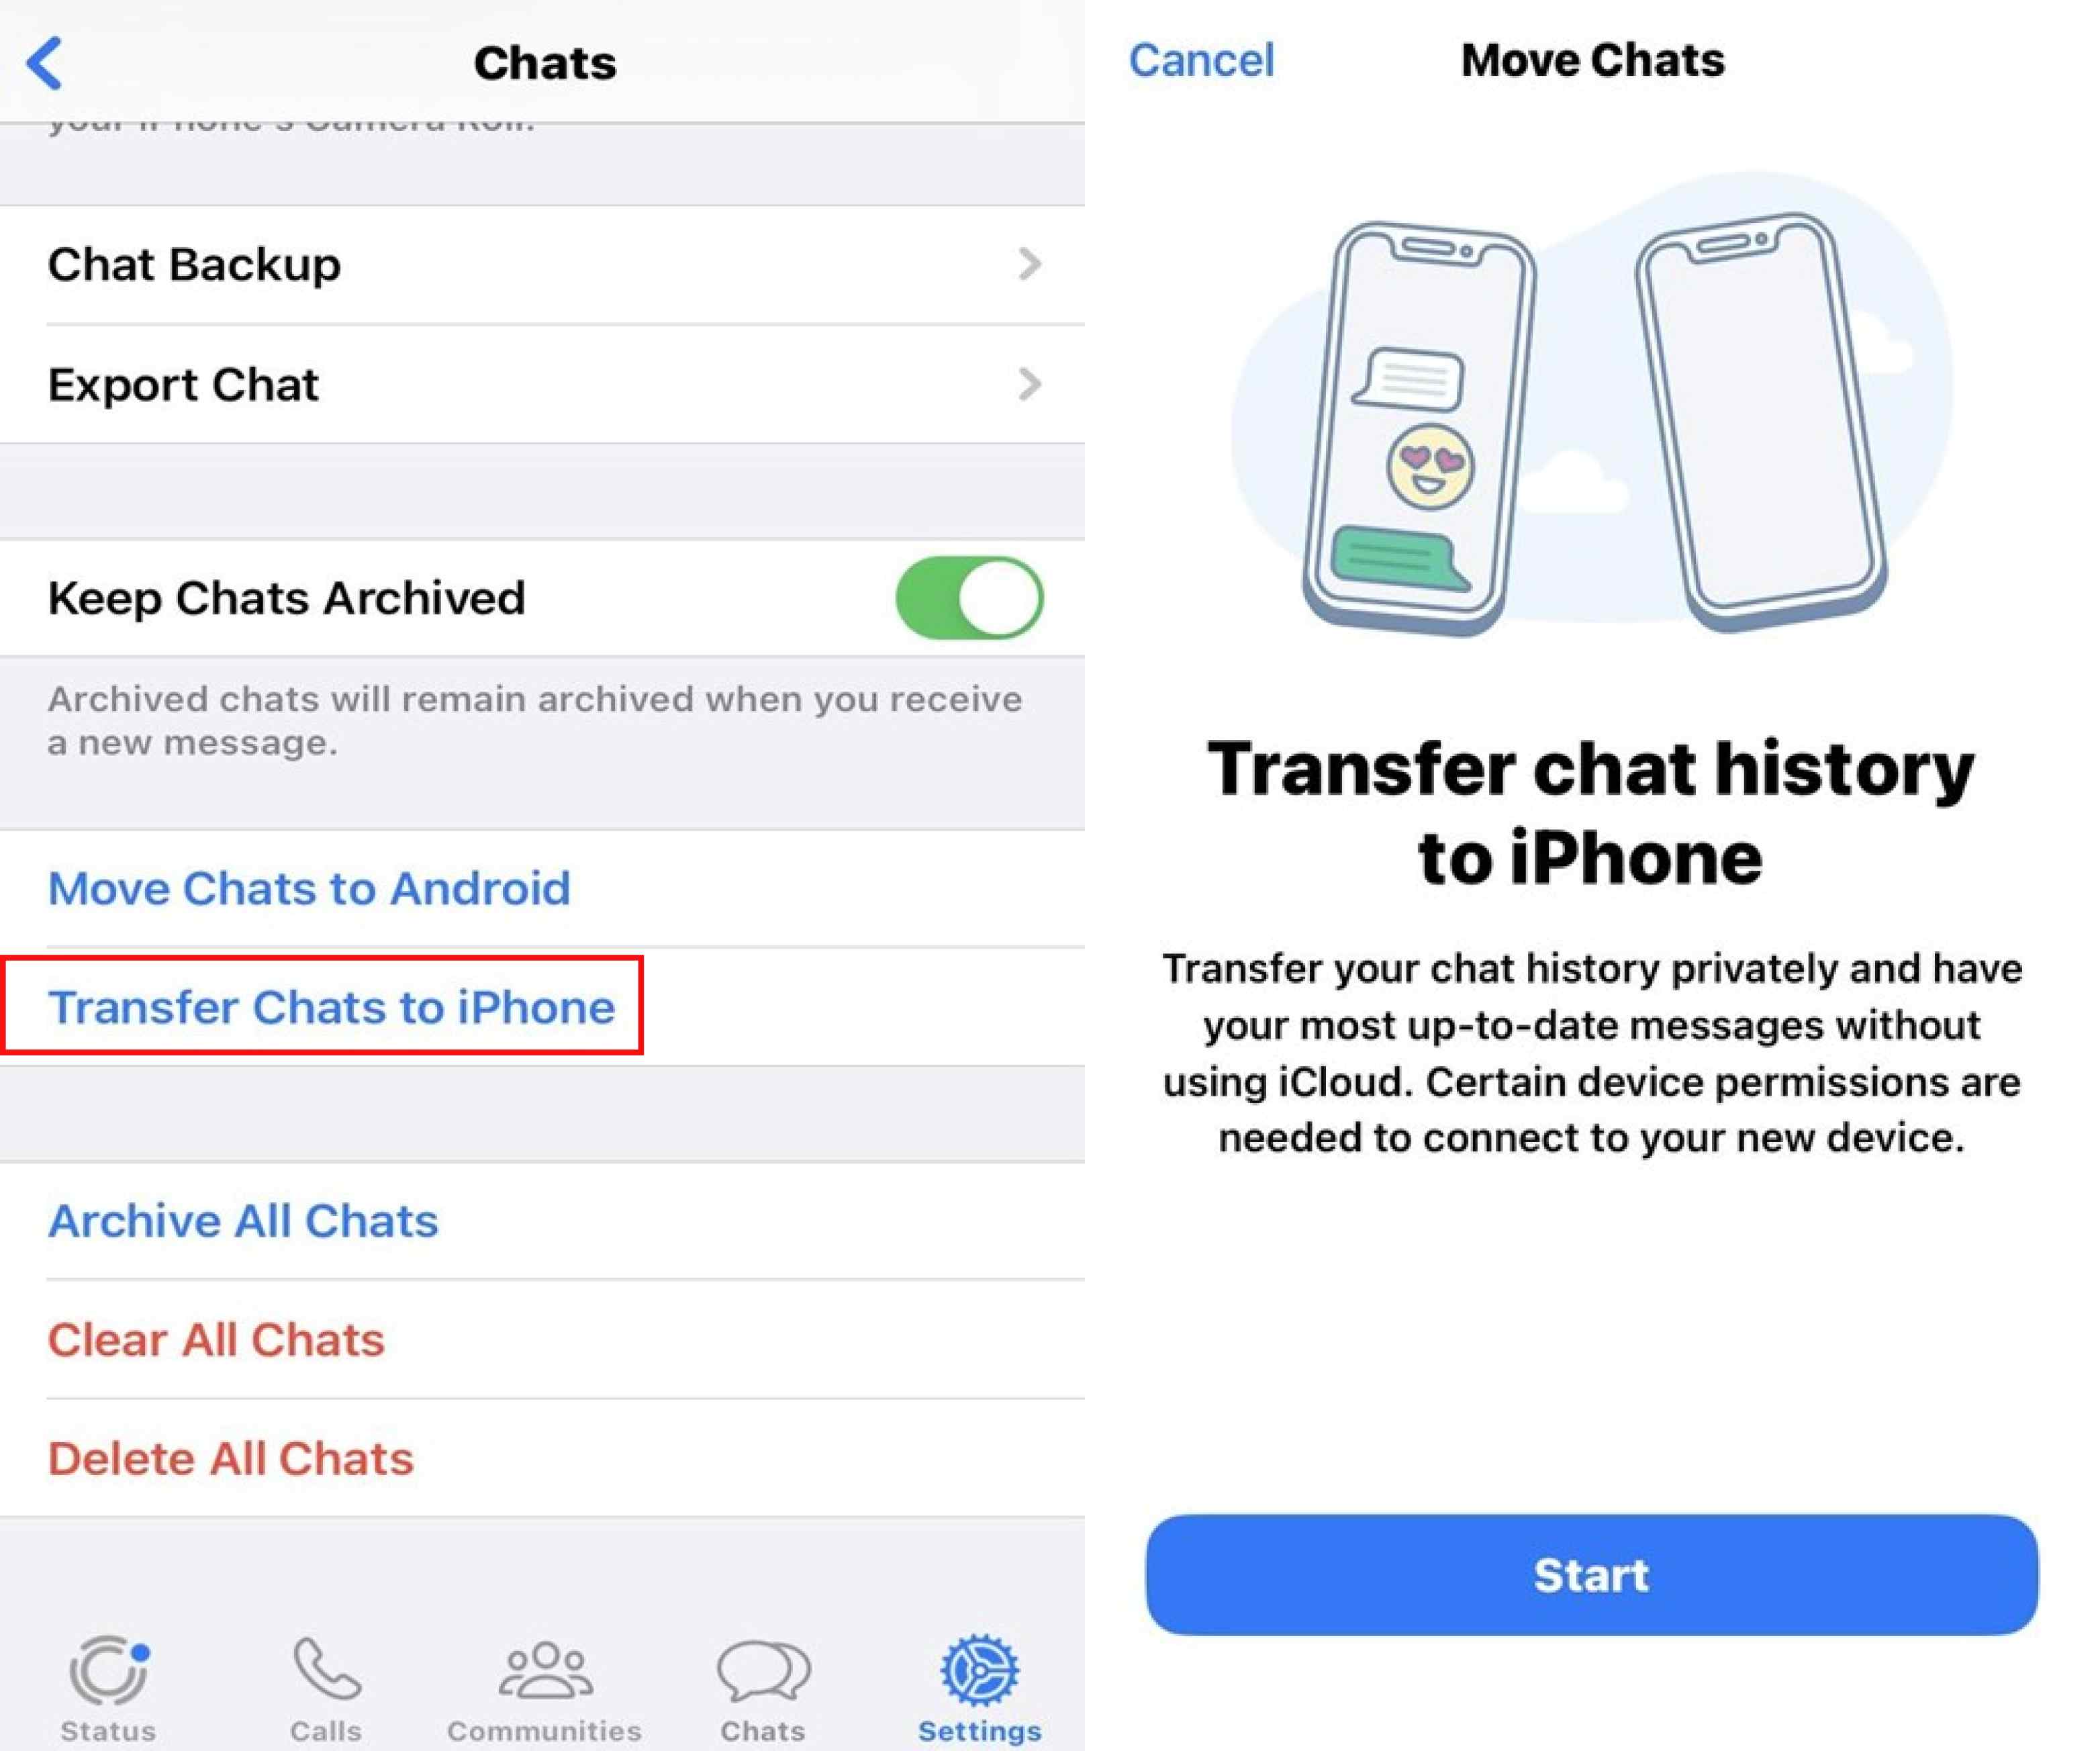  Transfer Chats to iPhone